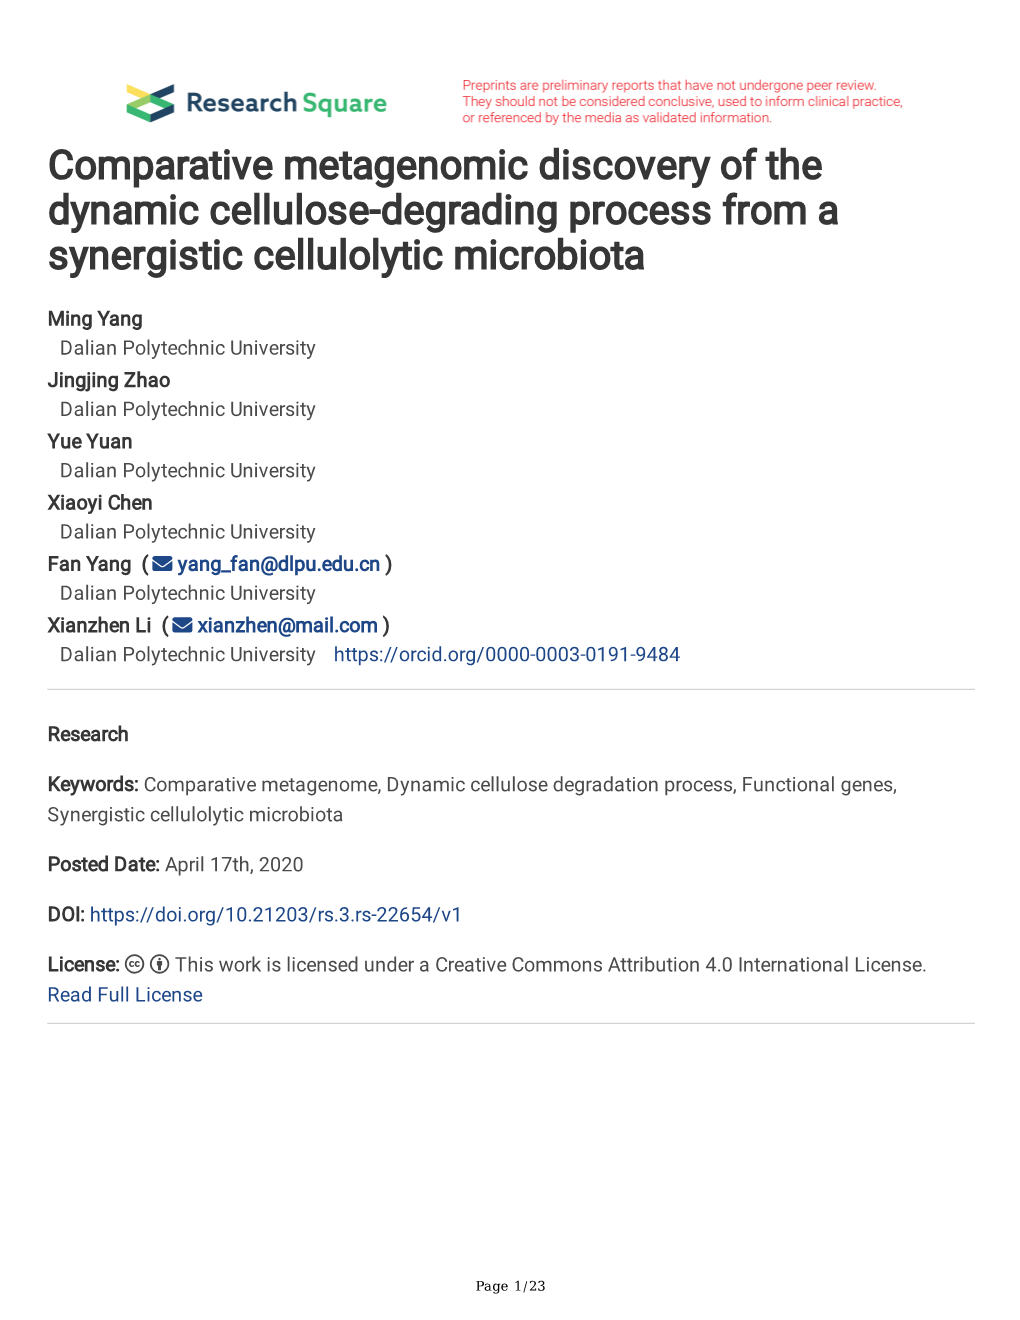 Comparative Metagenomic Discovery of the Dynamic Cellulose-Degrading Process from a Synergistic Cellulolytic Microbiota